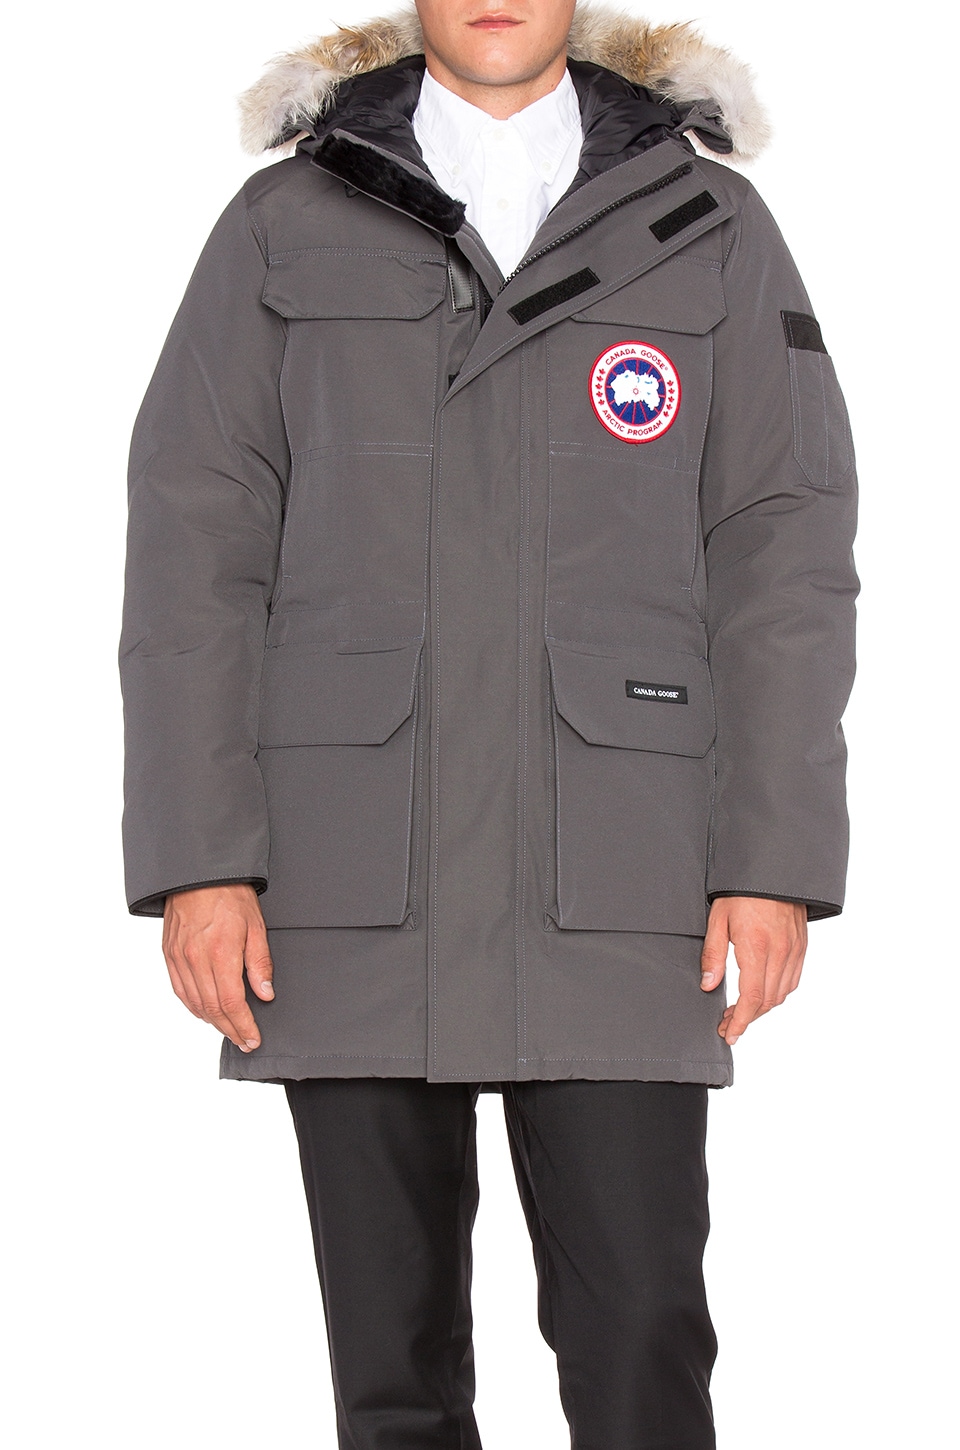 CANADA GOOSE EXPEDITION COYOTE FUR-TRIMMED JACKET, GRAY | ModeSens